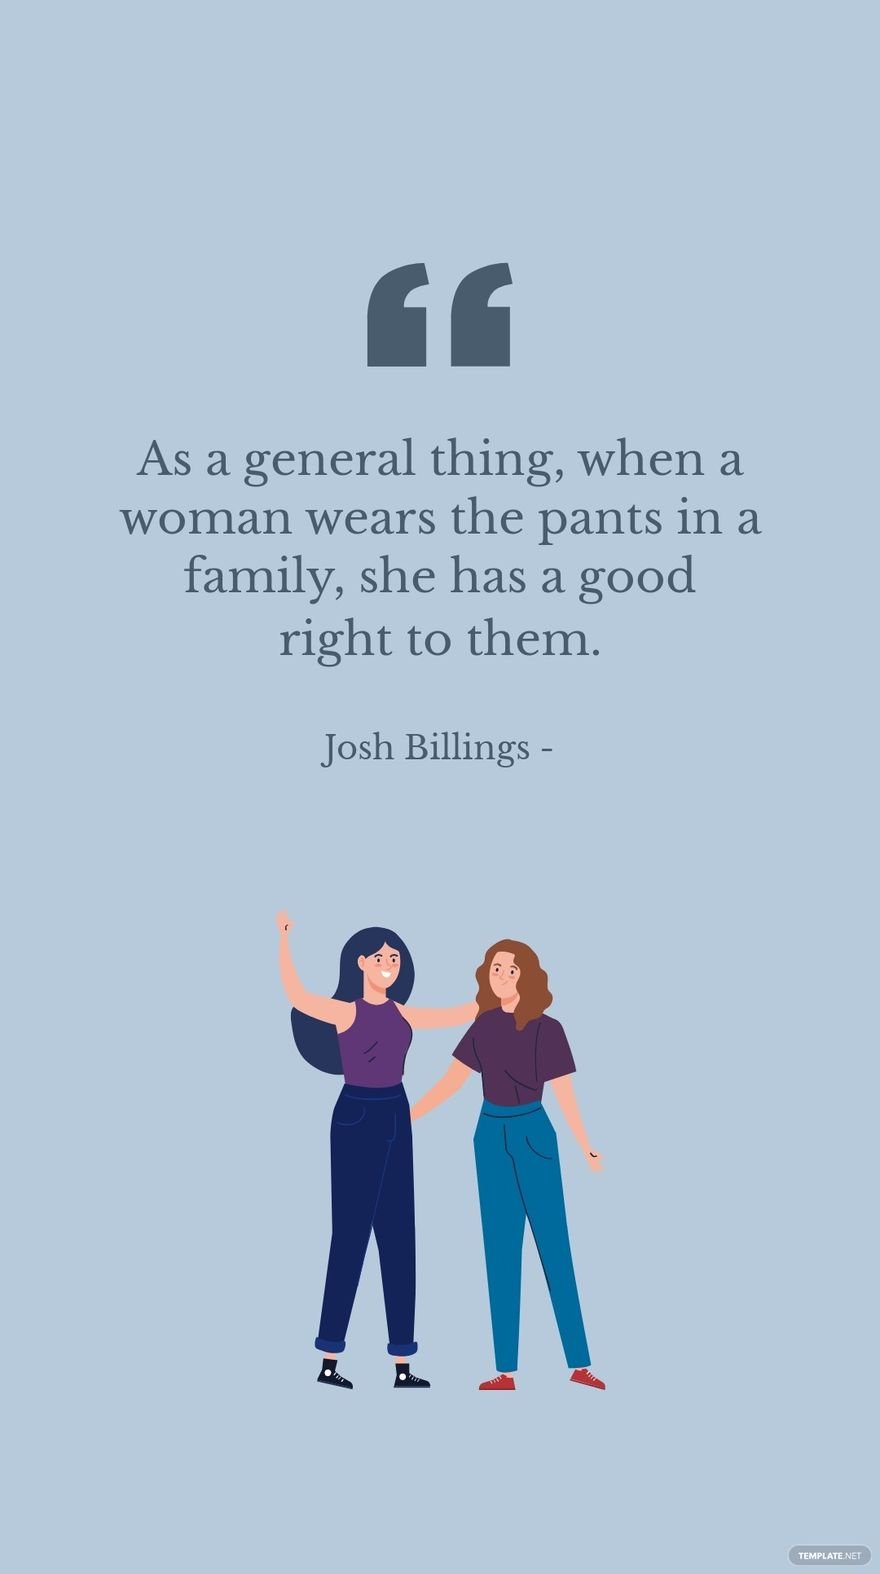 Josh Billings - As a general thing, when a woman wears the pants in a family, she has a good right to them. in JPG